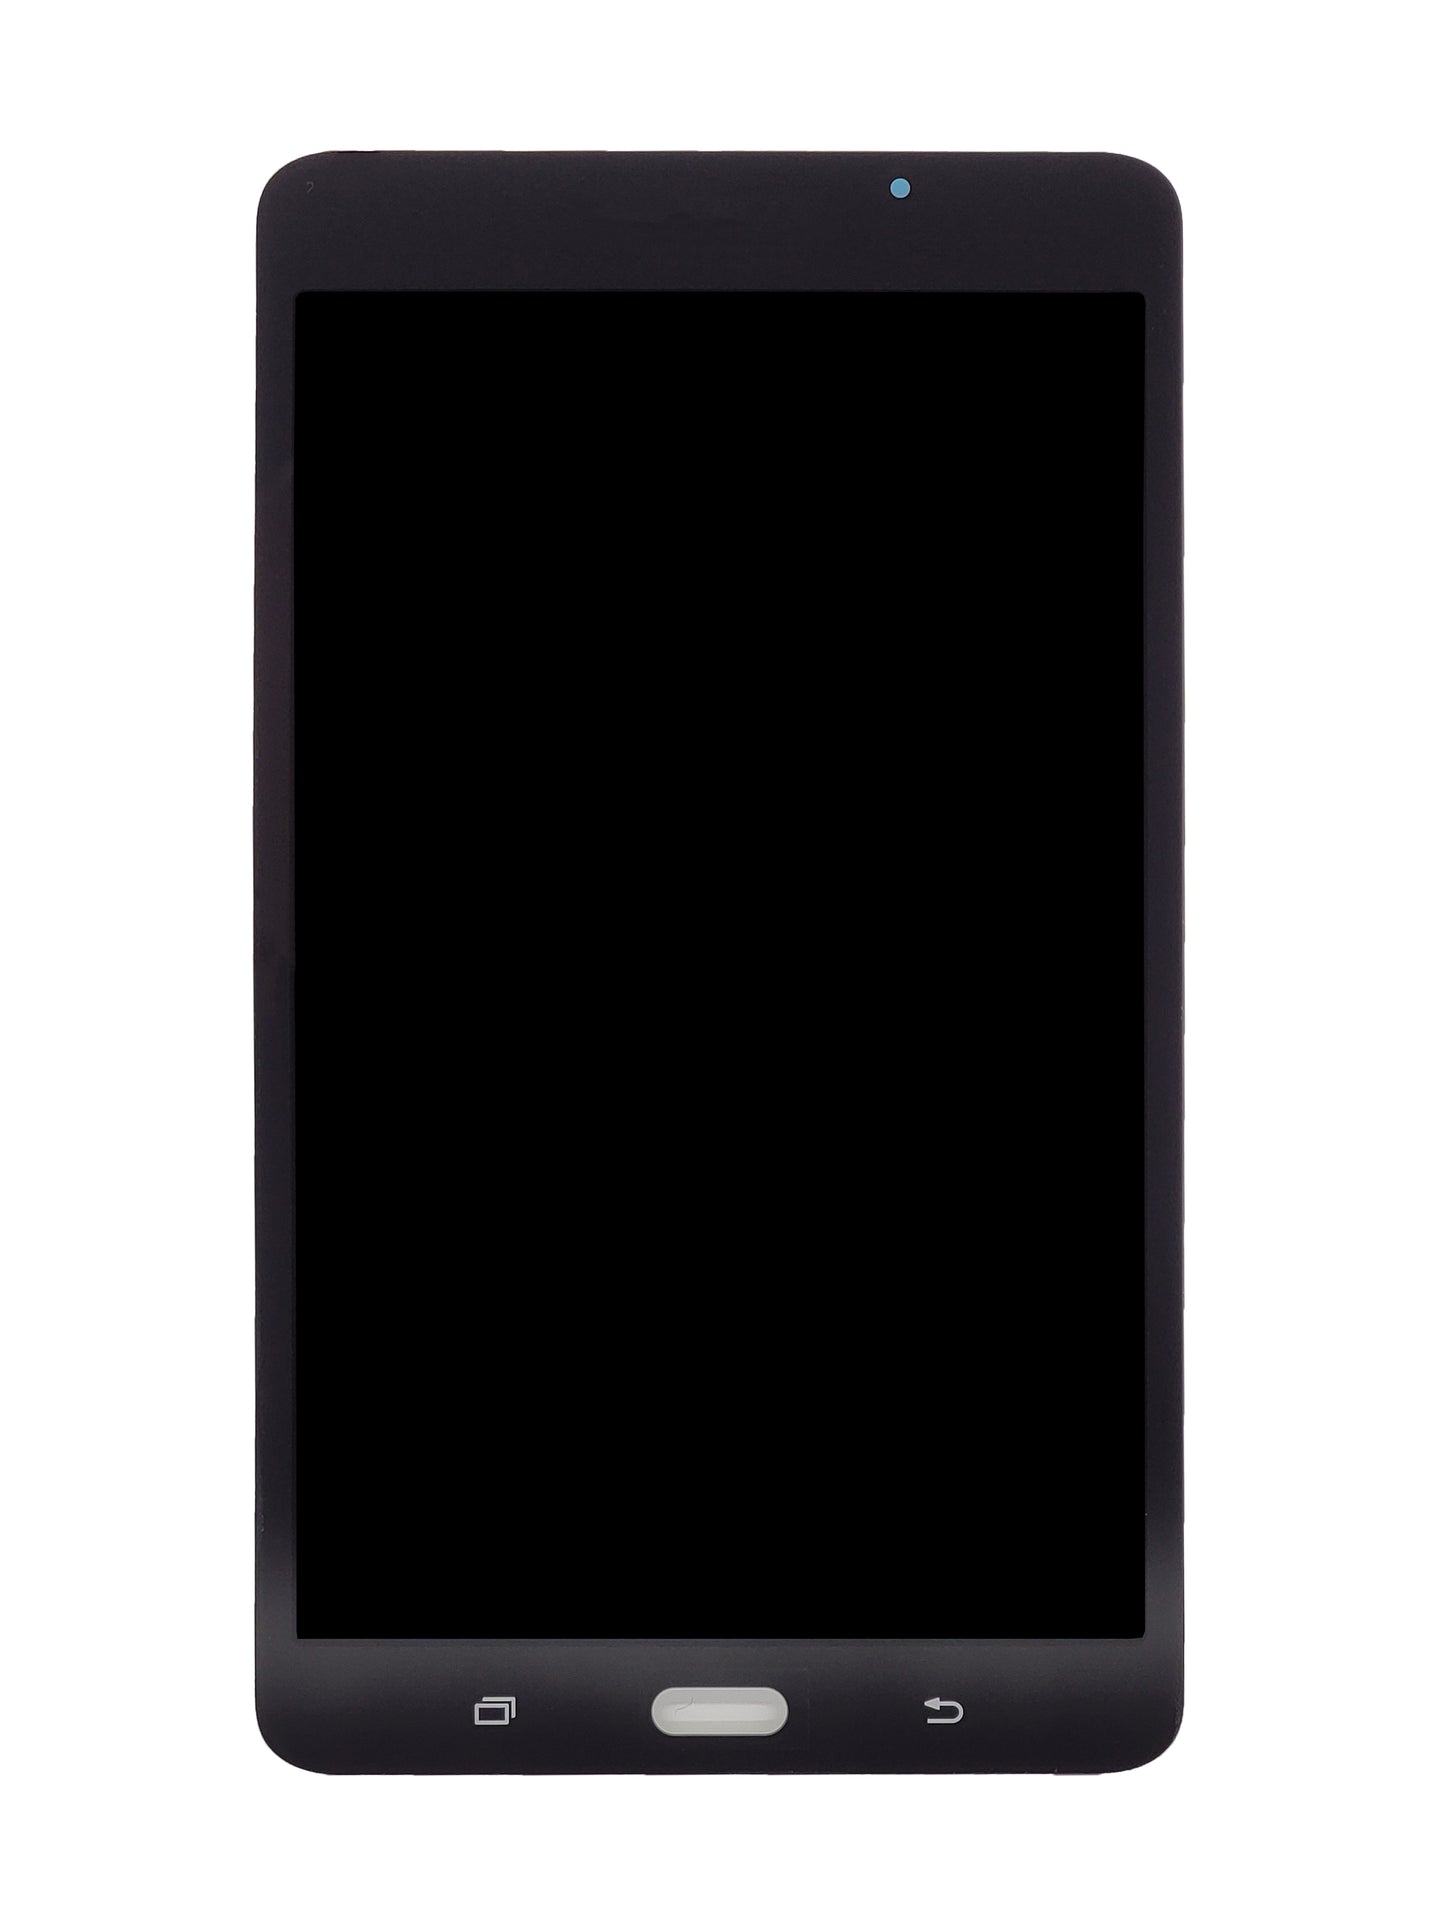 SGT Tab A 7" (T280) LCD Assembly with Digitizer (Black)